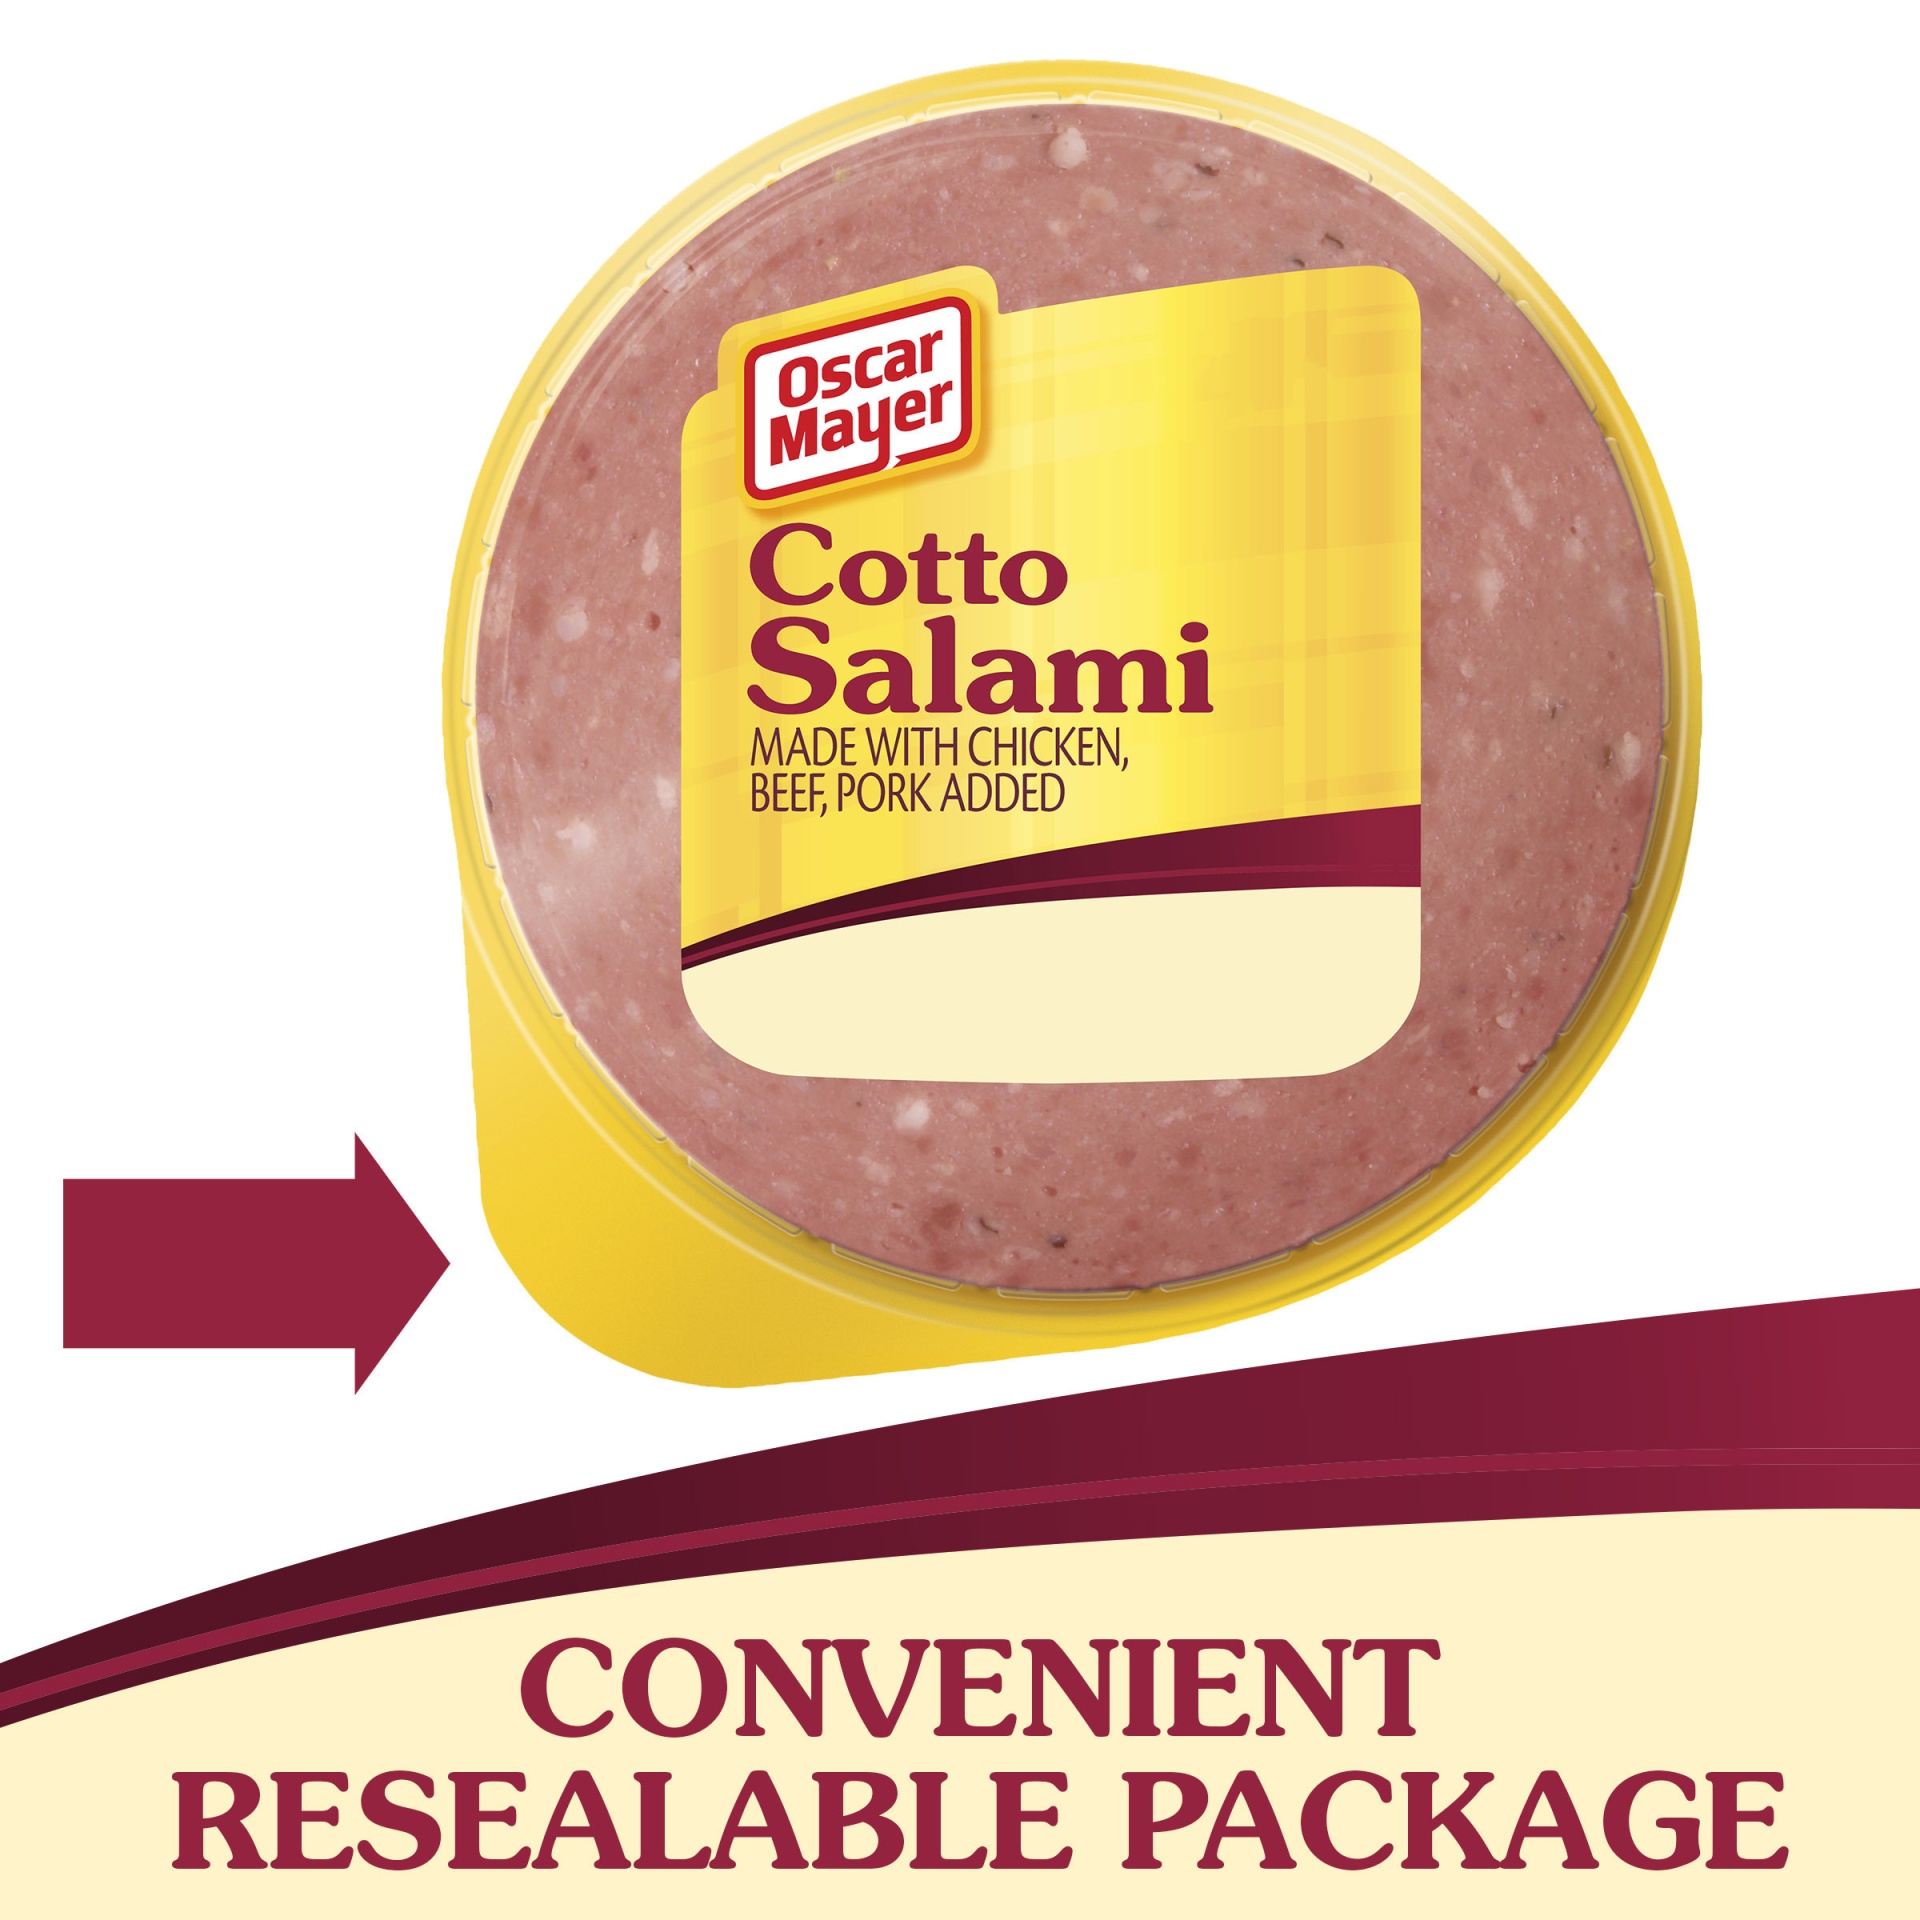 slide 3 of 5, Oscar Mayer Cotto Salami Made with Chicken And Beef, Pork Added Sliced Lunch Meat Pack, 16 oz